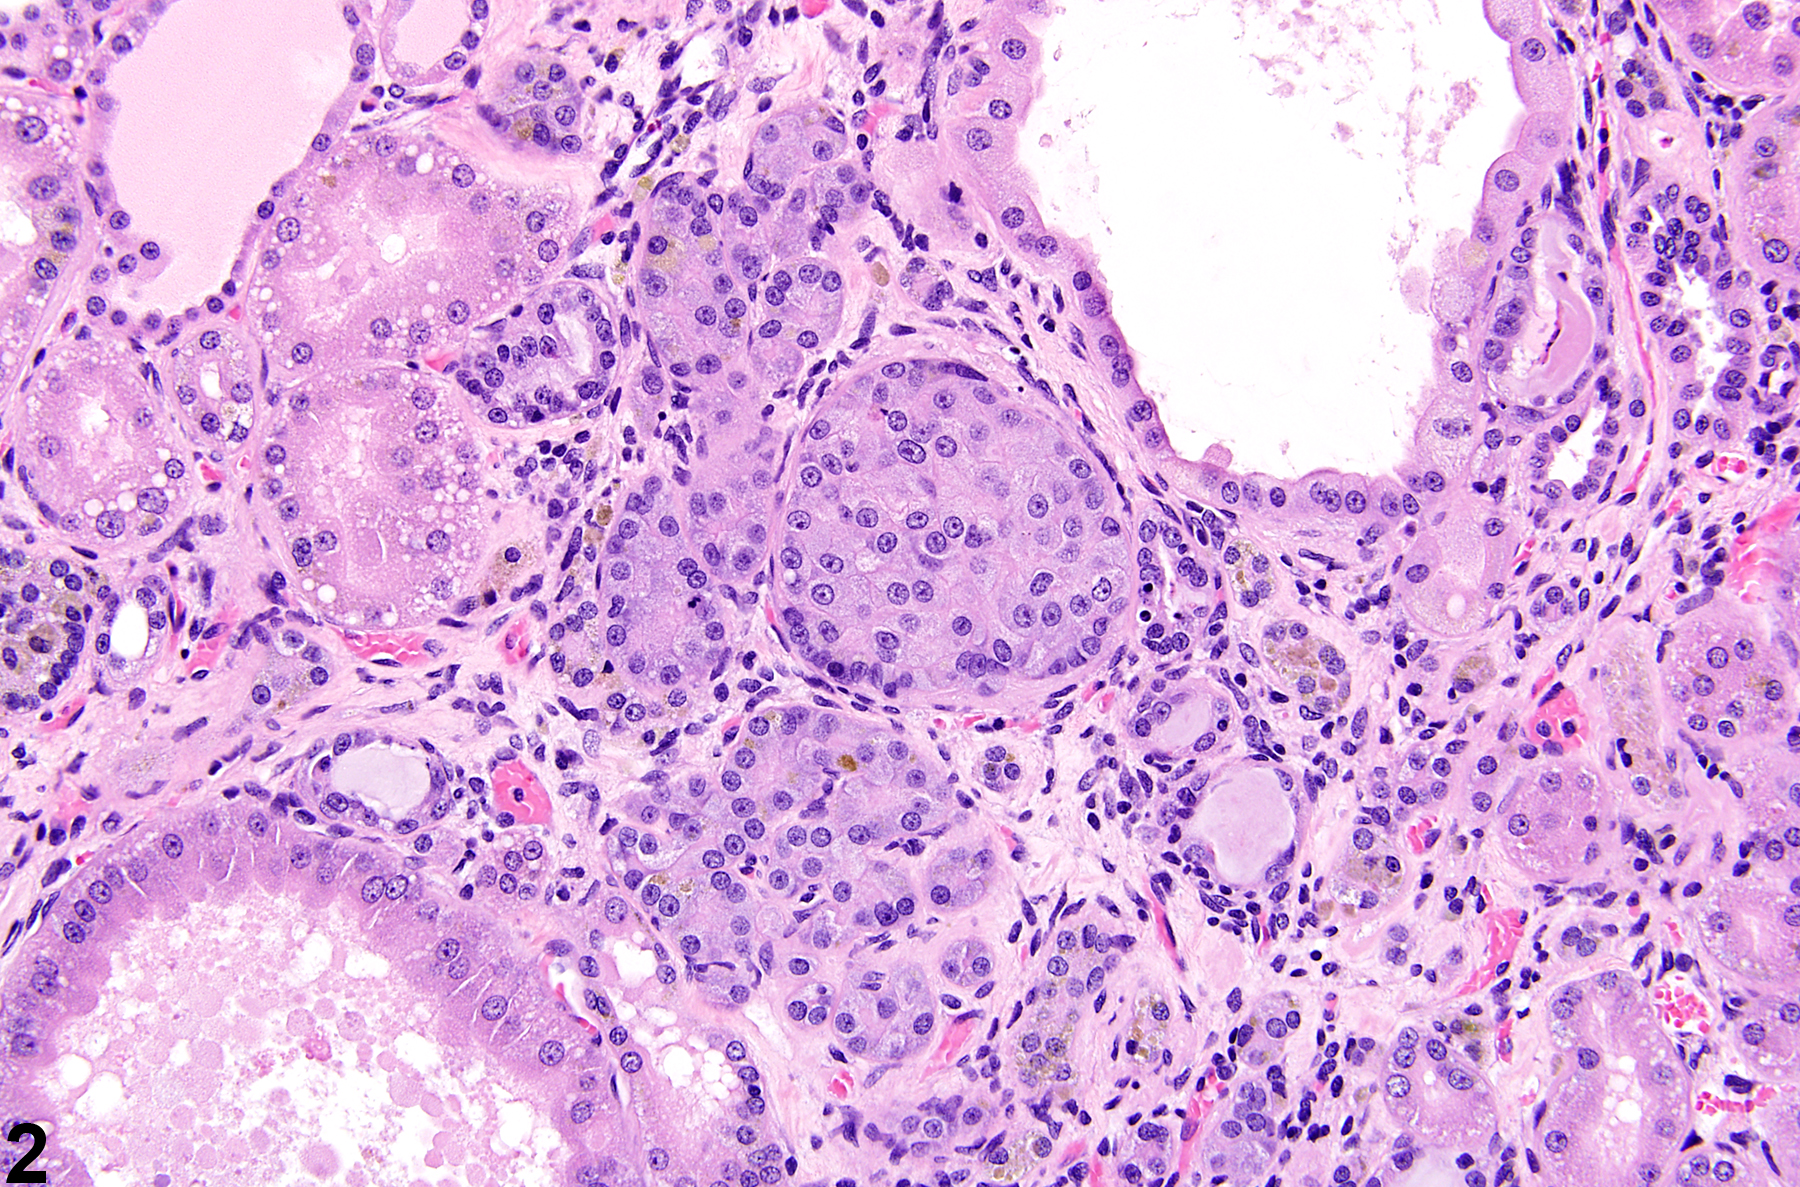 Image of renal tubule epithelium atypical tubule hyperplasia in the kidney from a male F344/N rat in a chronic study